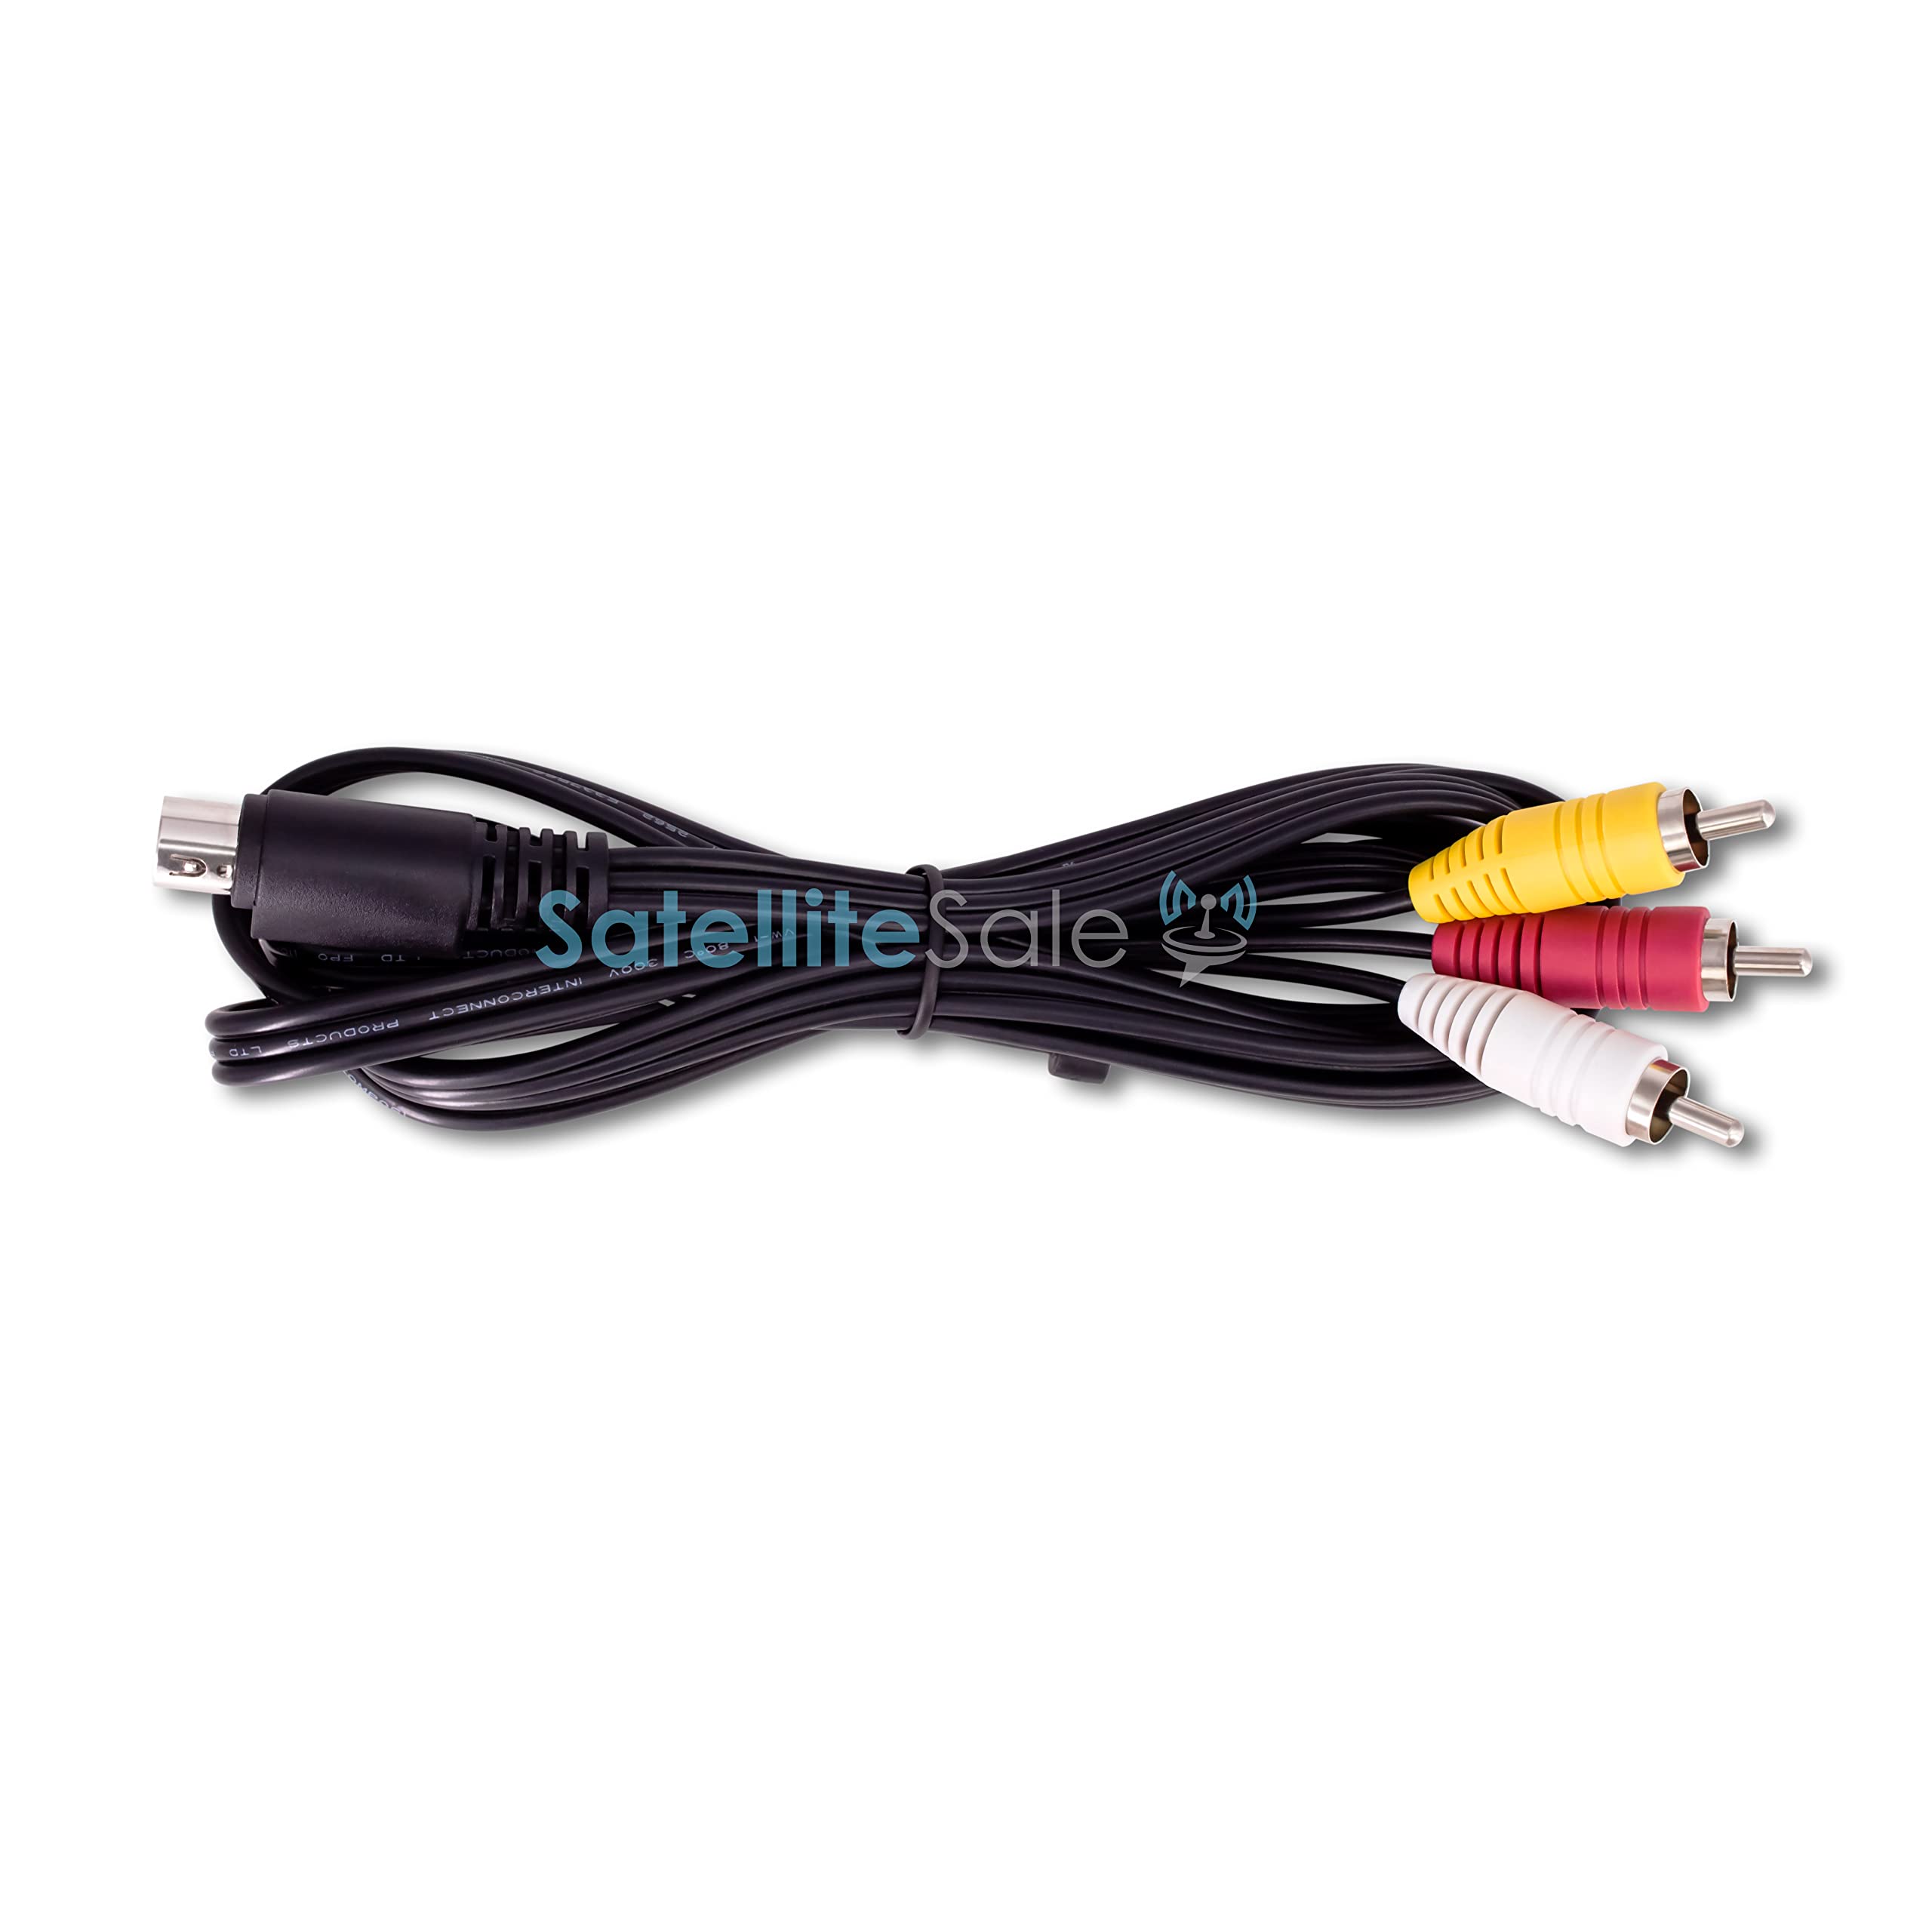 SatelliteSale Audio Video 10 Pin RCA Composite DirecTV Replacement Cable Universal Wire PVC Black Cord 6 feet